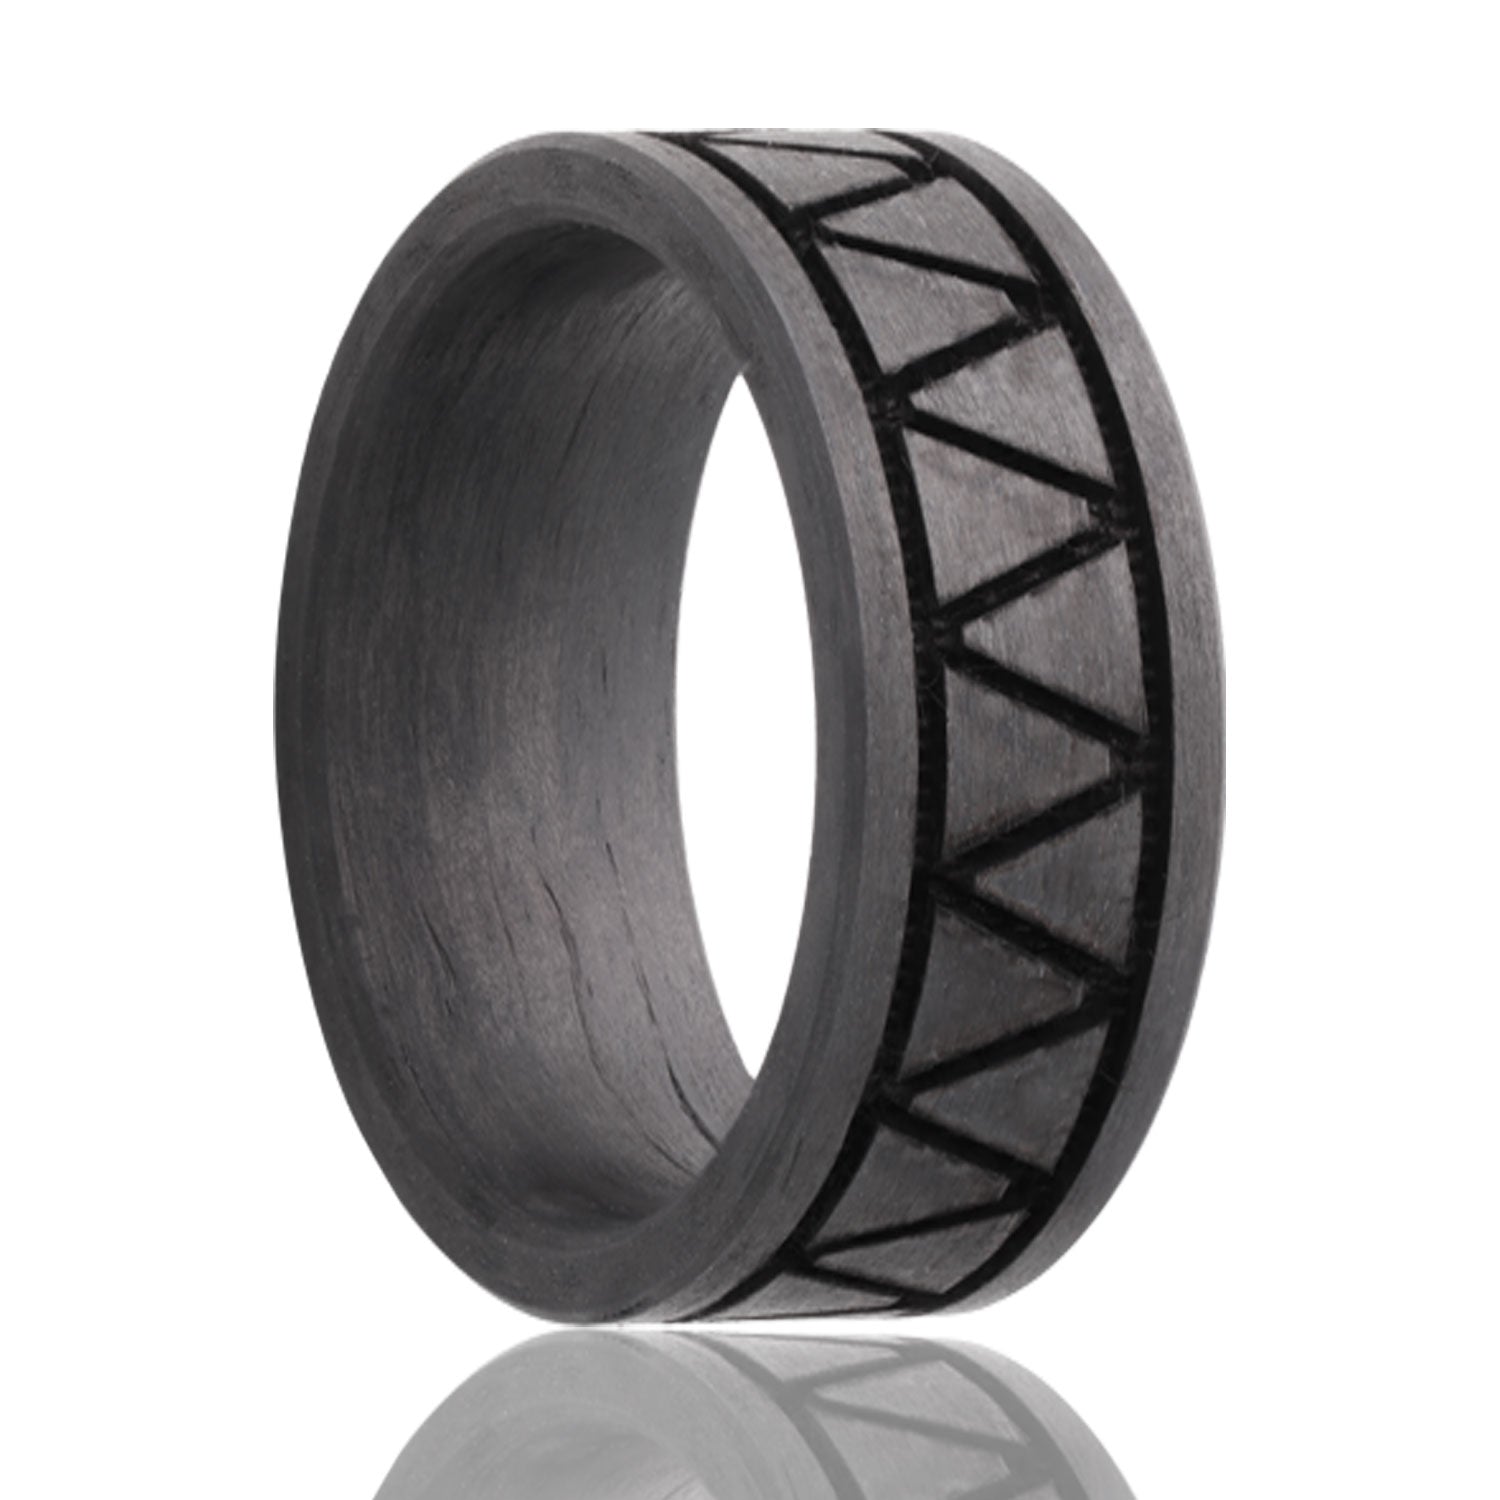 A triangle pattern carbon fiber men's wedding band displayed on a neutral white background.